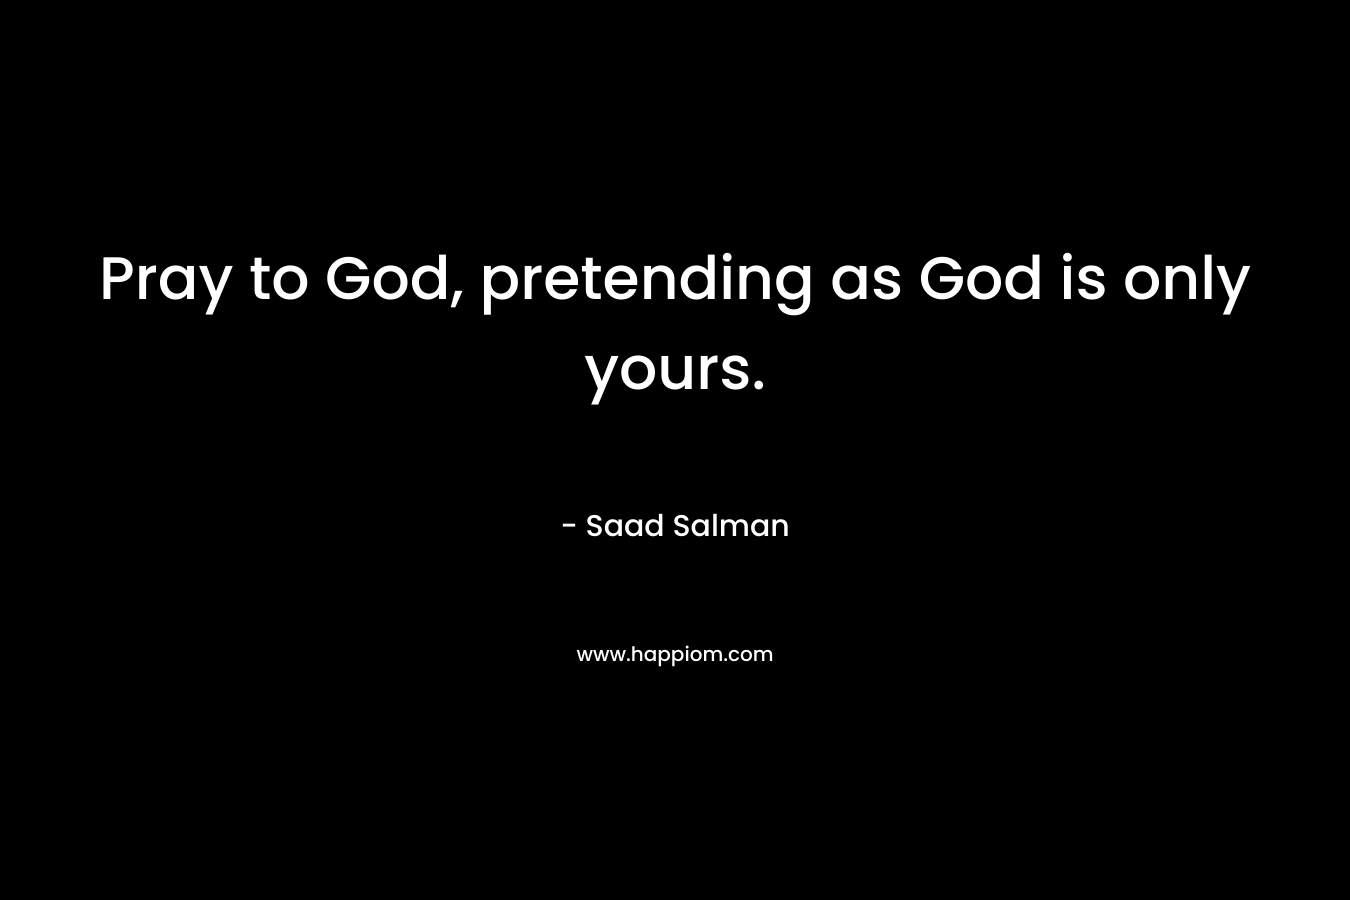 Pray to God, pretending as God is only yours. – Saad Salman